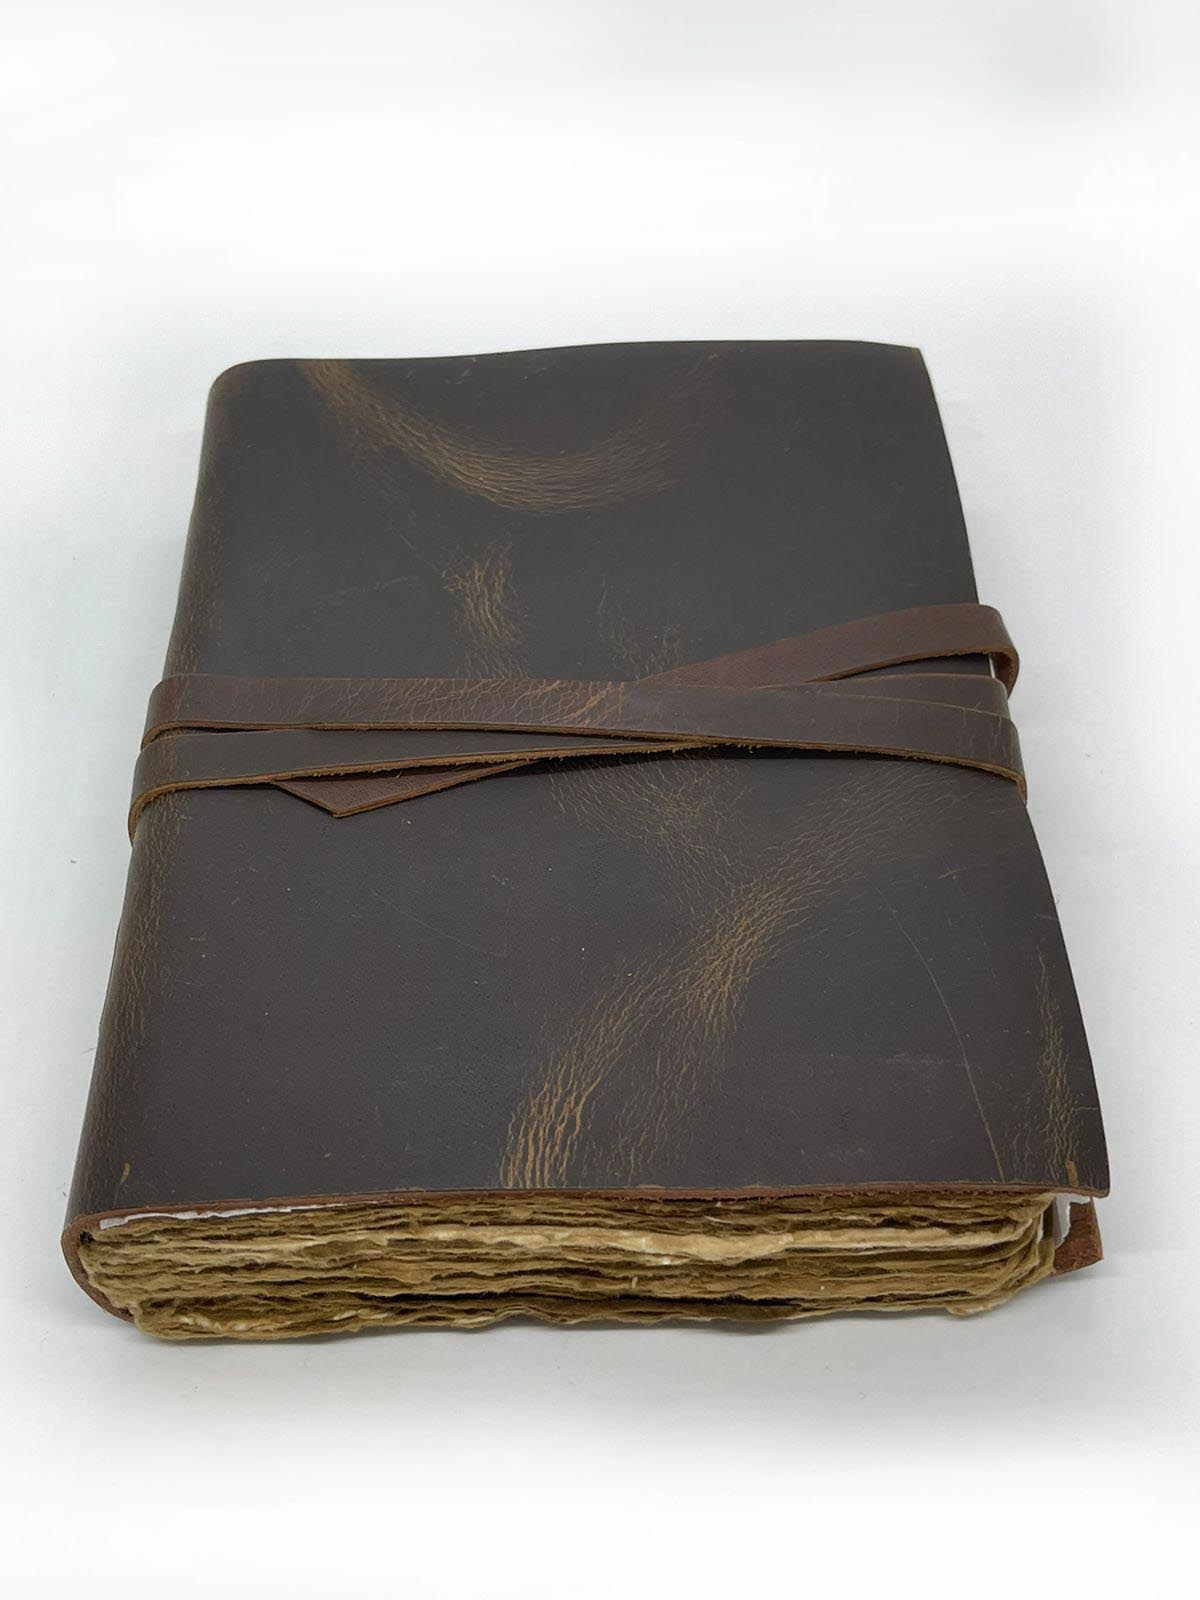 Leather journal 8*6' (MB5) 